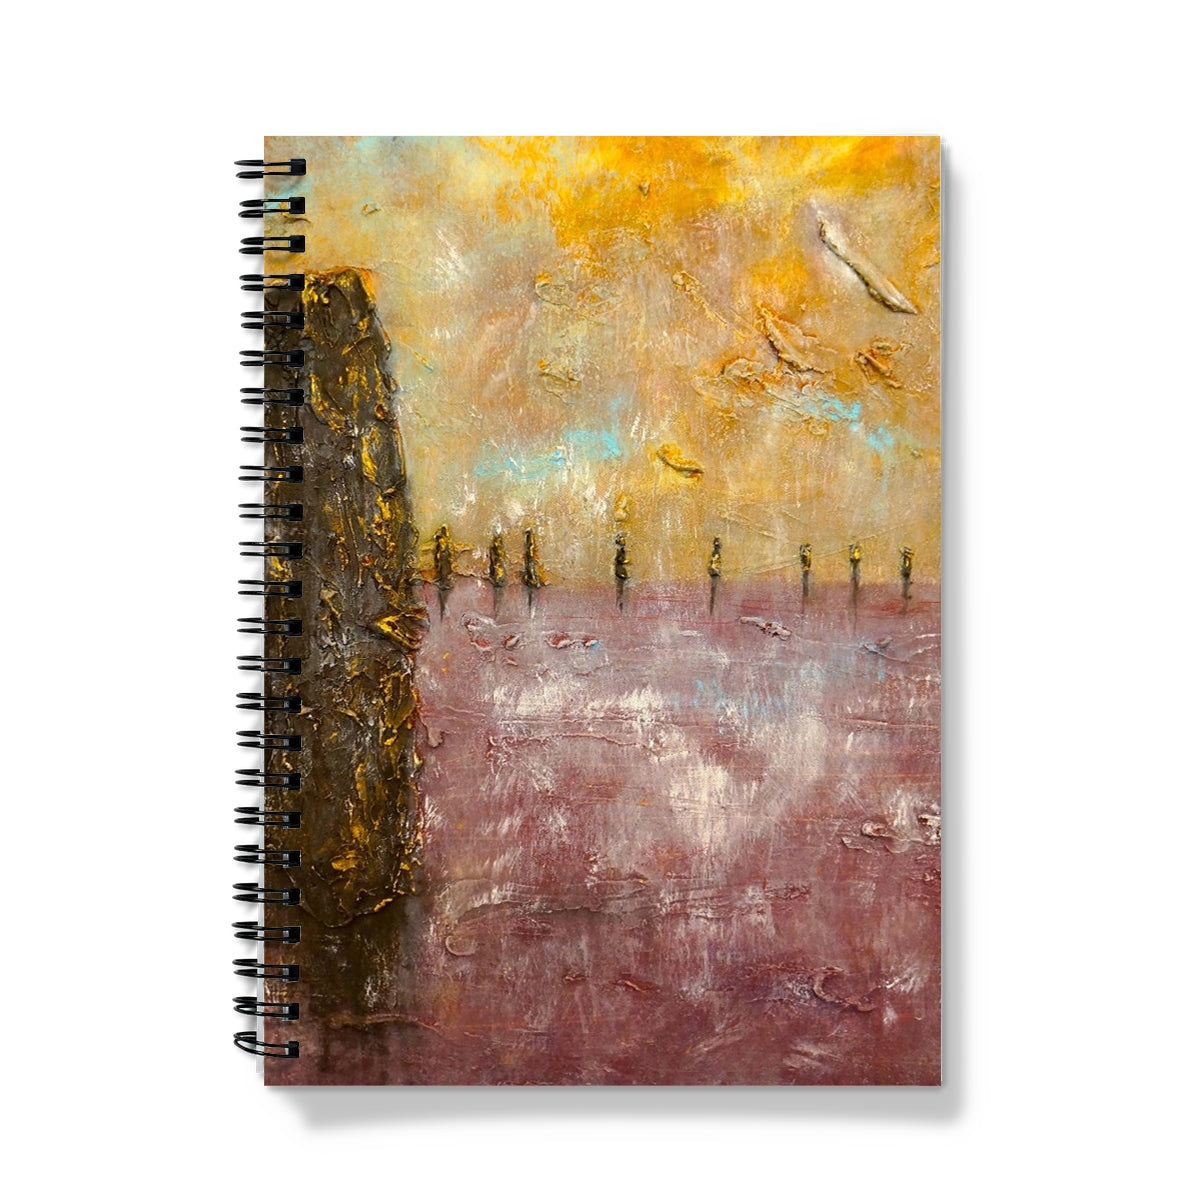 Brodgar Mist Orkney Art Gifts Notebook-Journals & Notebooks-Orkney Art Gallery-A5-Lined-Paintings, Prints, Homeware, Art Gifts From Scotland By Scottish Artist Kevin Hunter